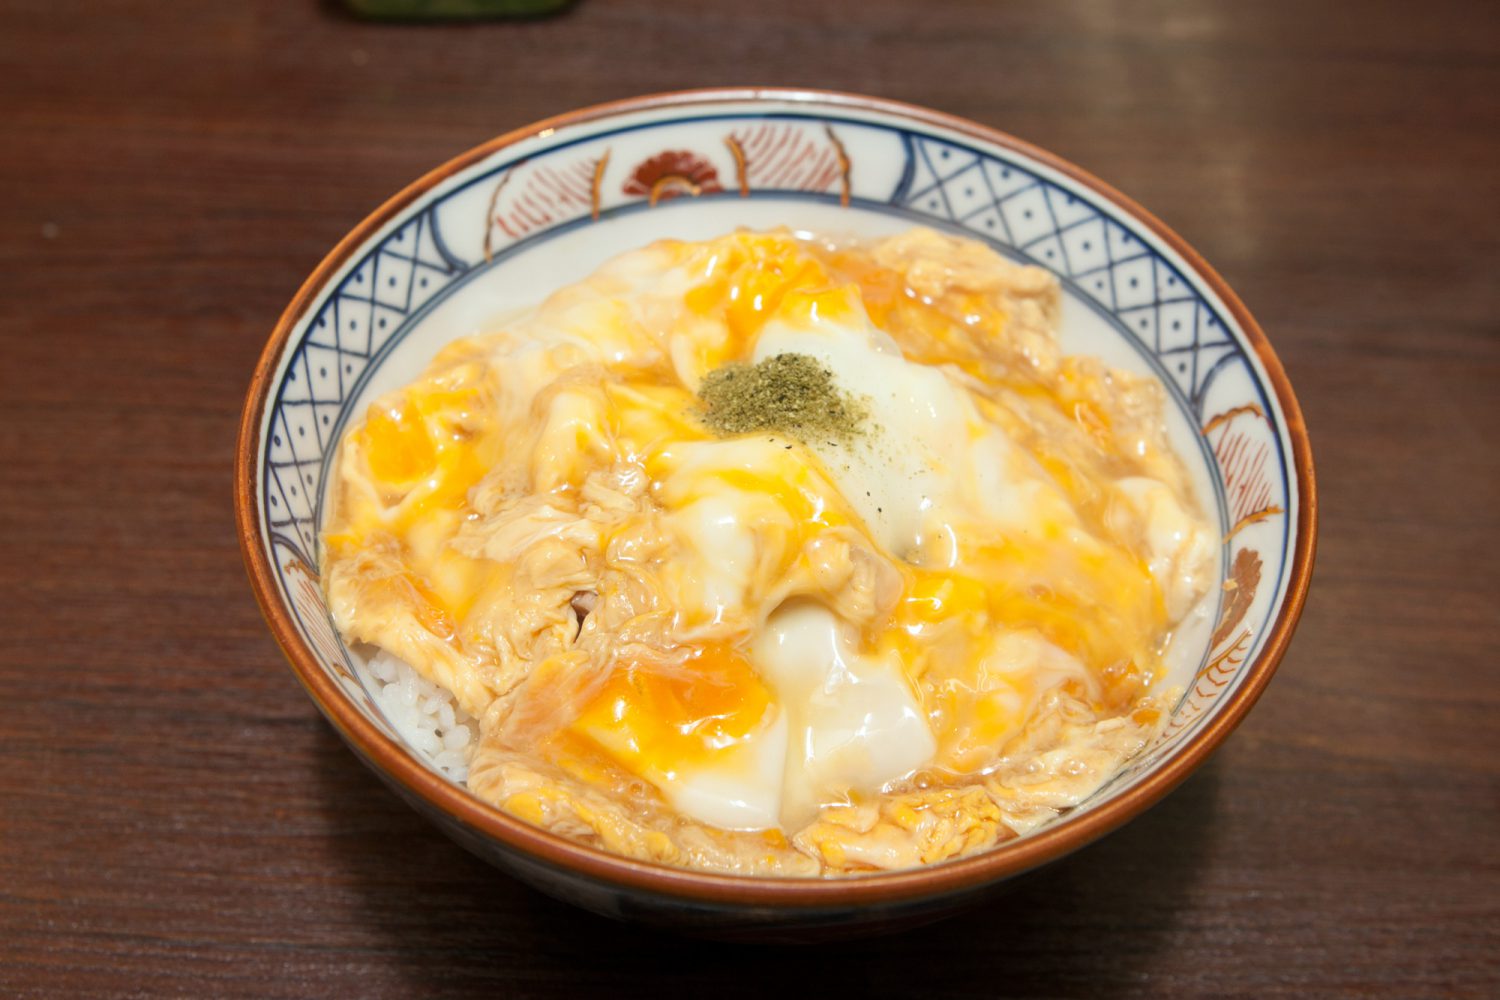 OYAKO-DON（親子丼） : Rice topped with chicken & partly-cooked egg